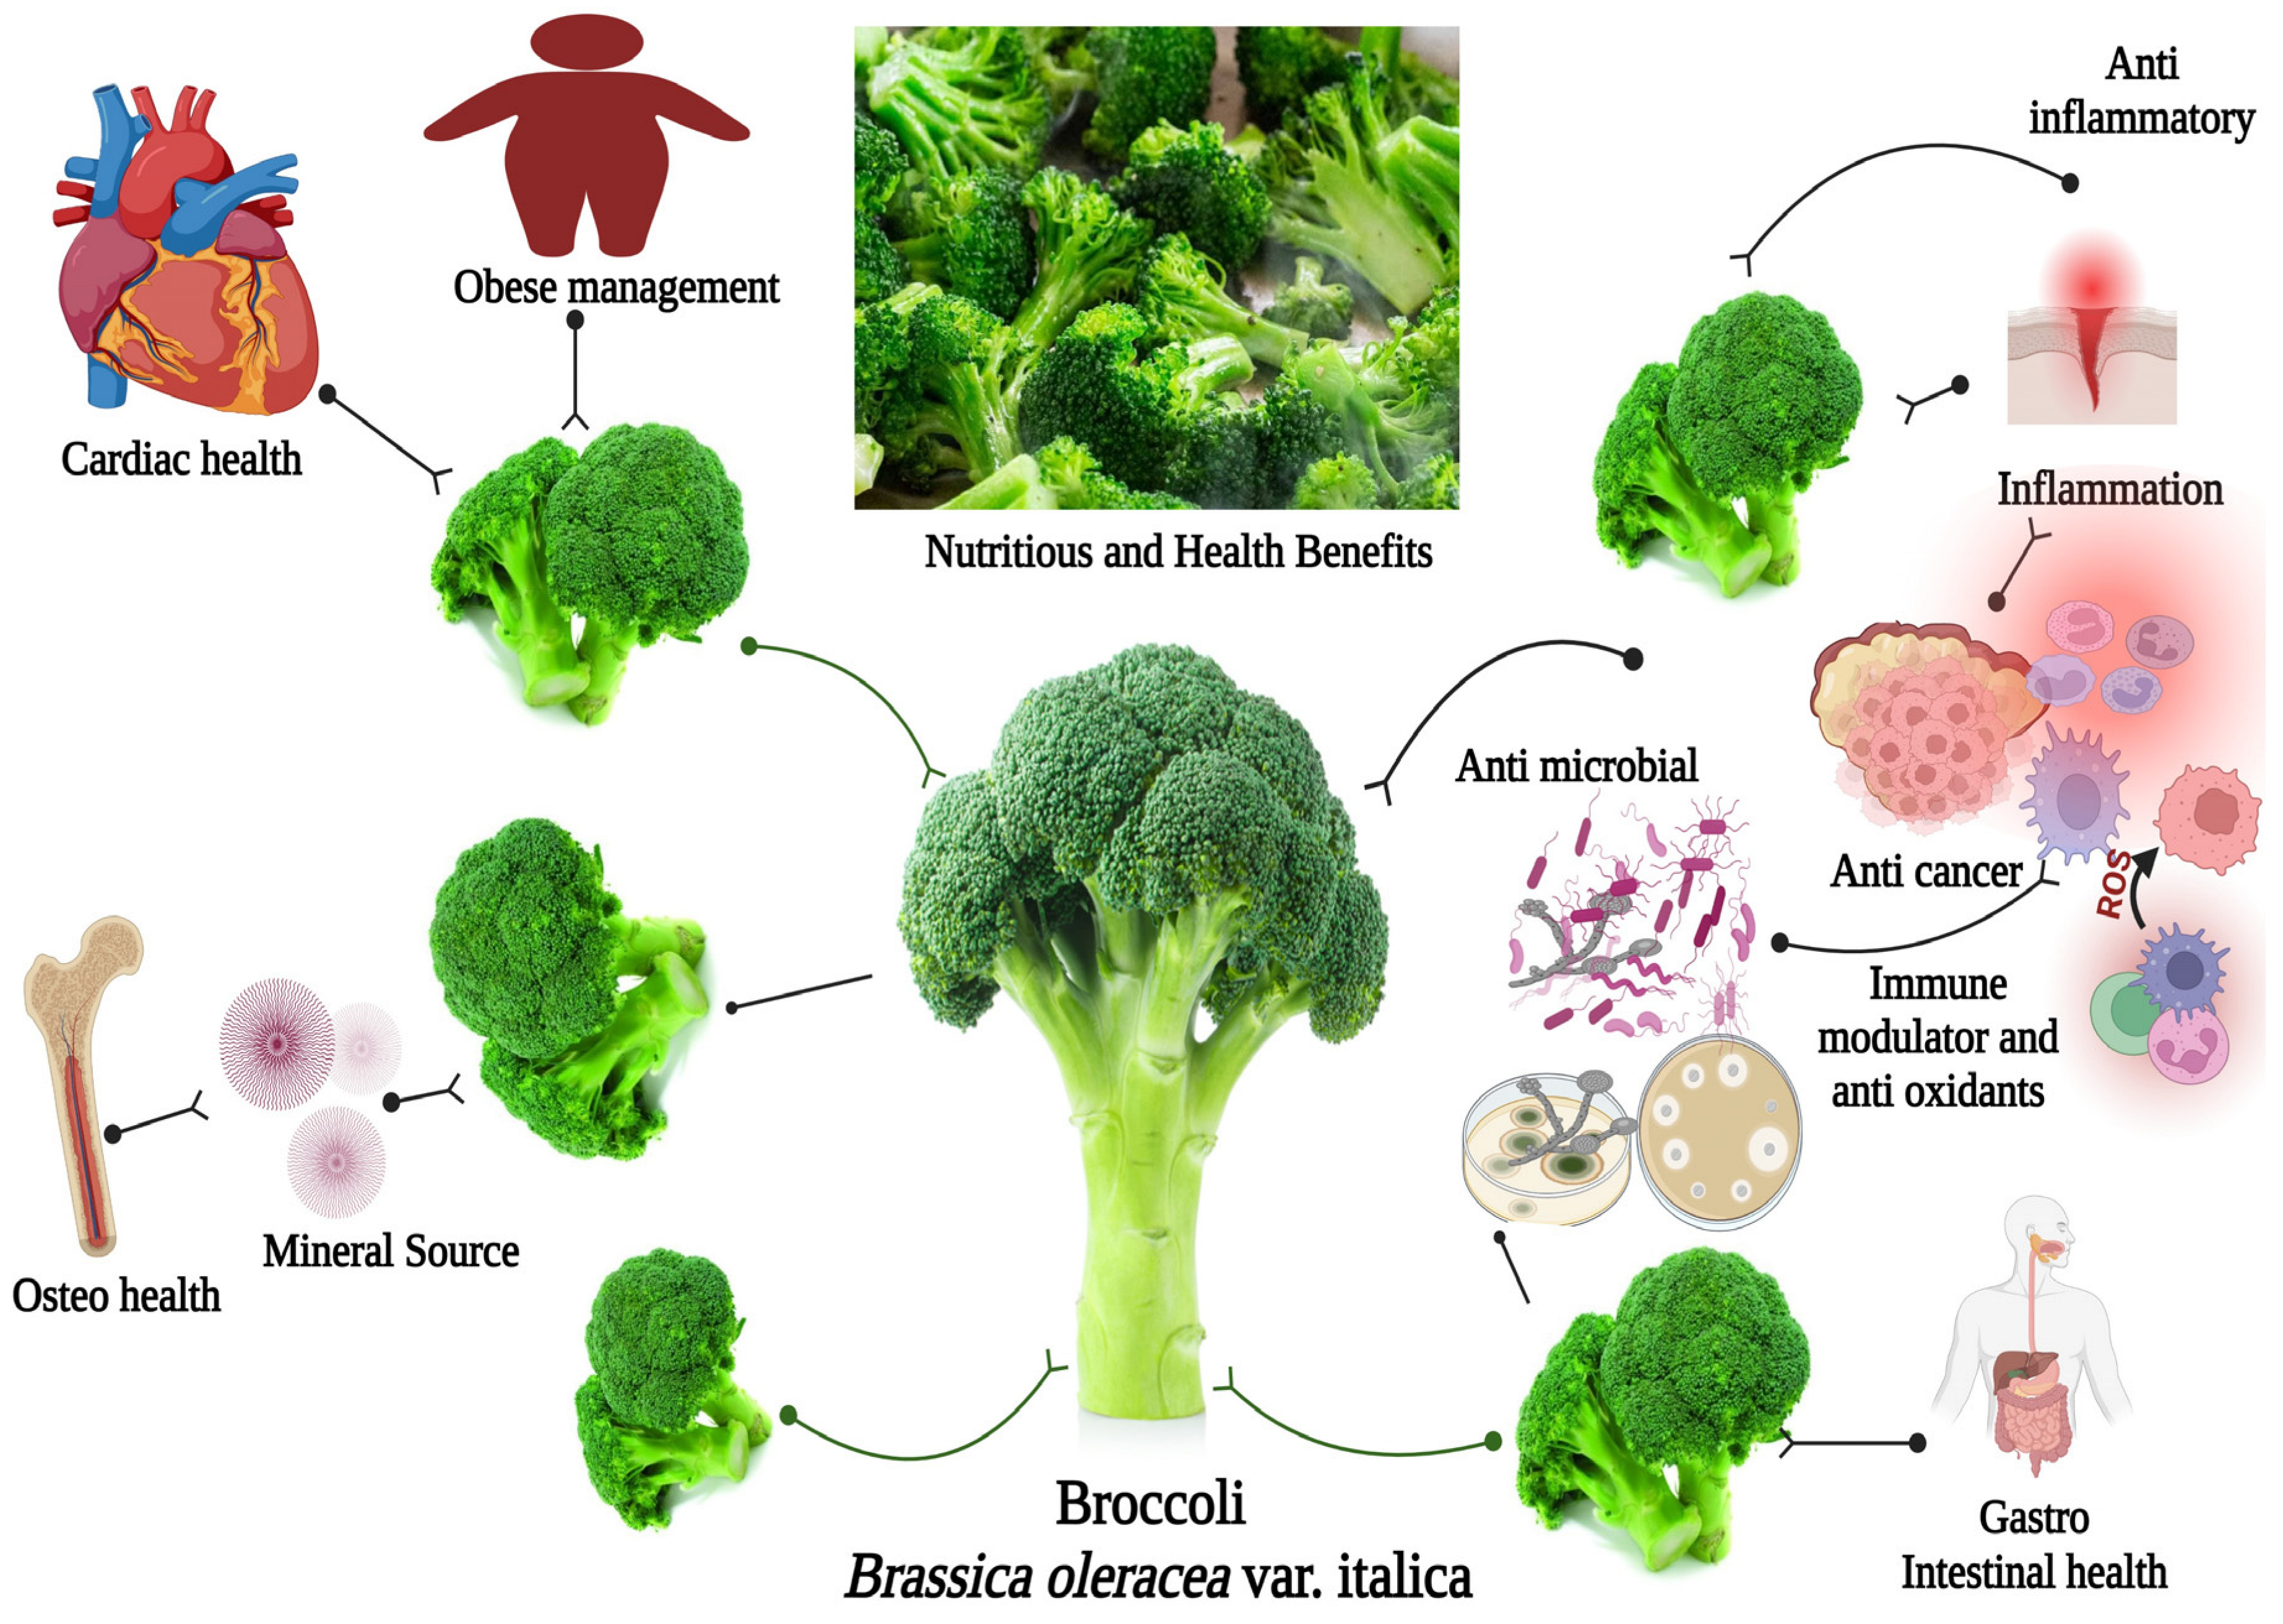 Antibiotics | Free Vegetable Its Attributes, Properties Broccoli: Anti-inflammatory Antimicrobial Health: | Review Abilities, An of for In-Depth Nutritional A and Multi-Faceted Full-Text